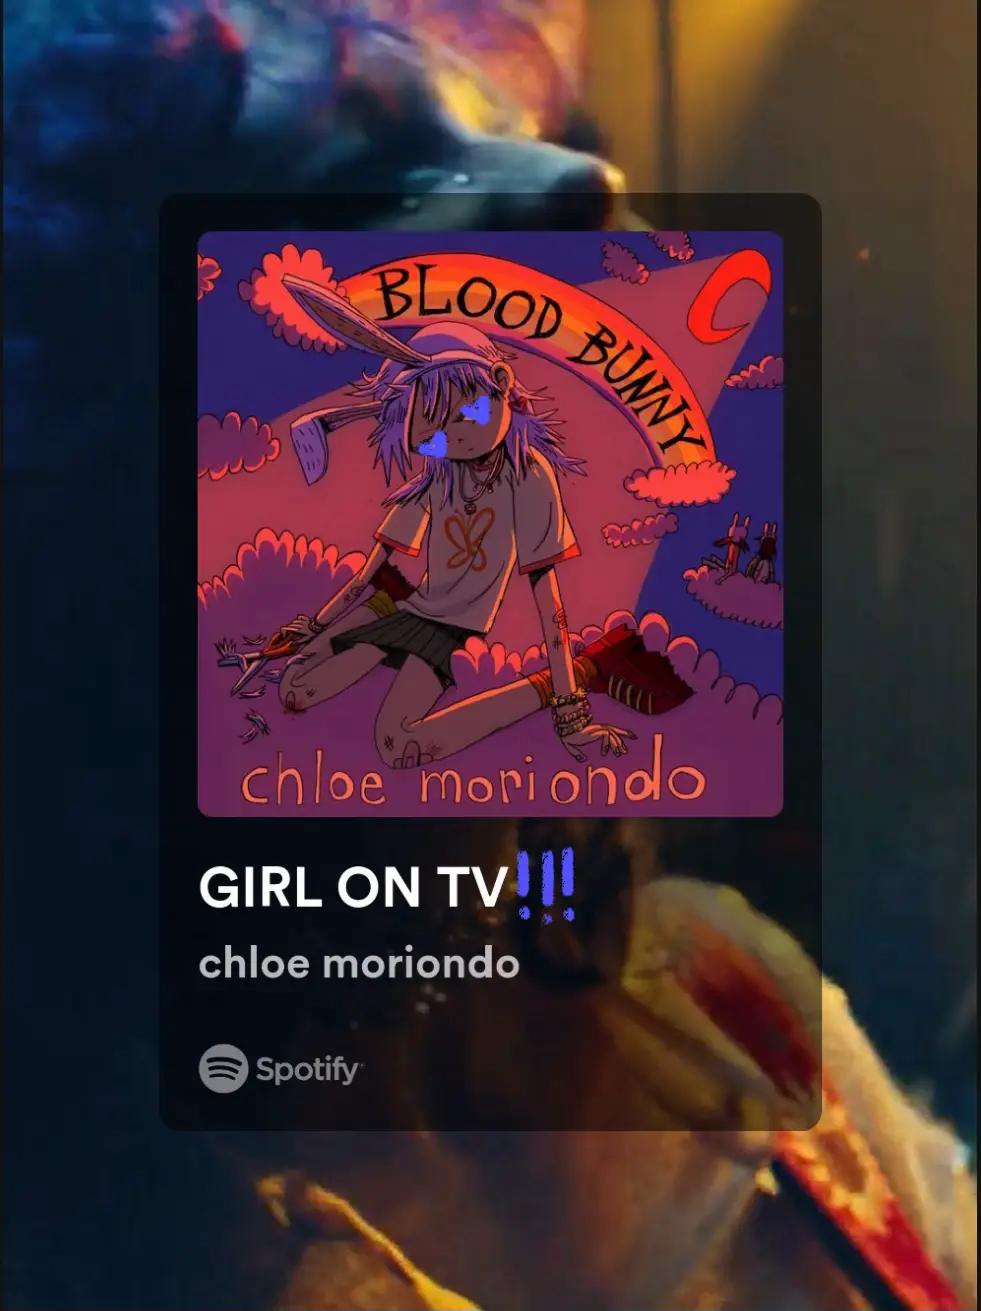  A Spotify ad for Blood Bunny by Chloe Moriondo.